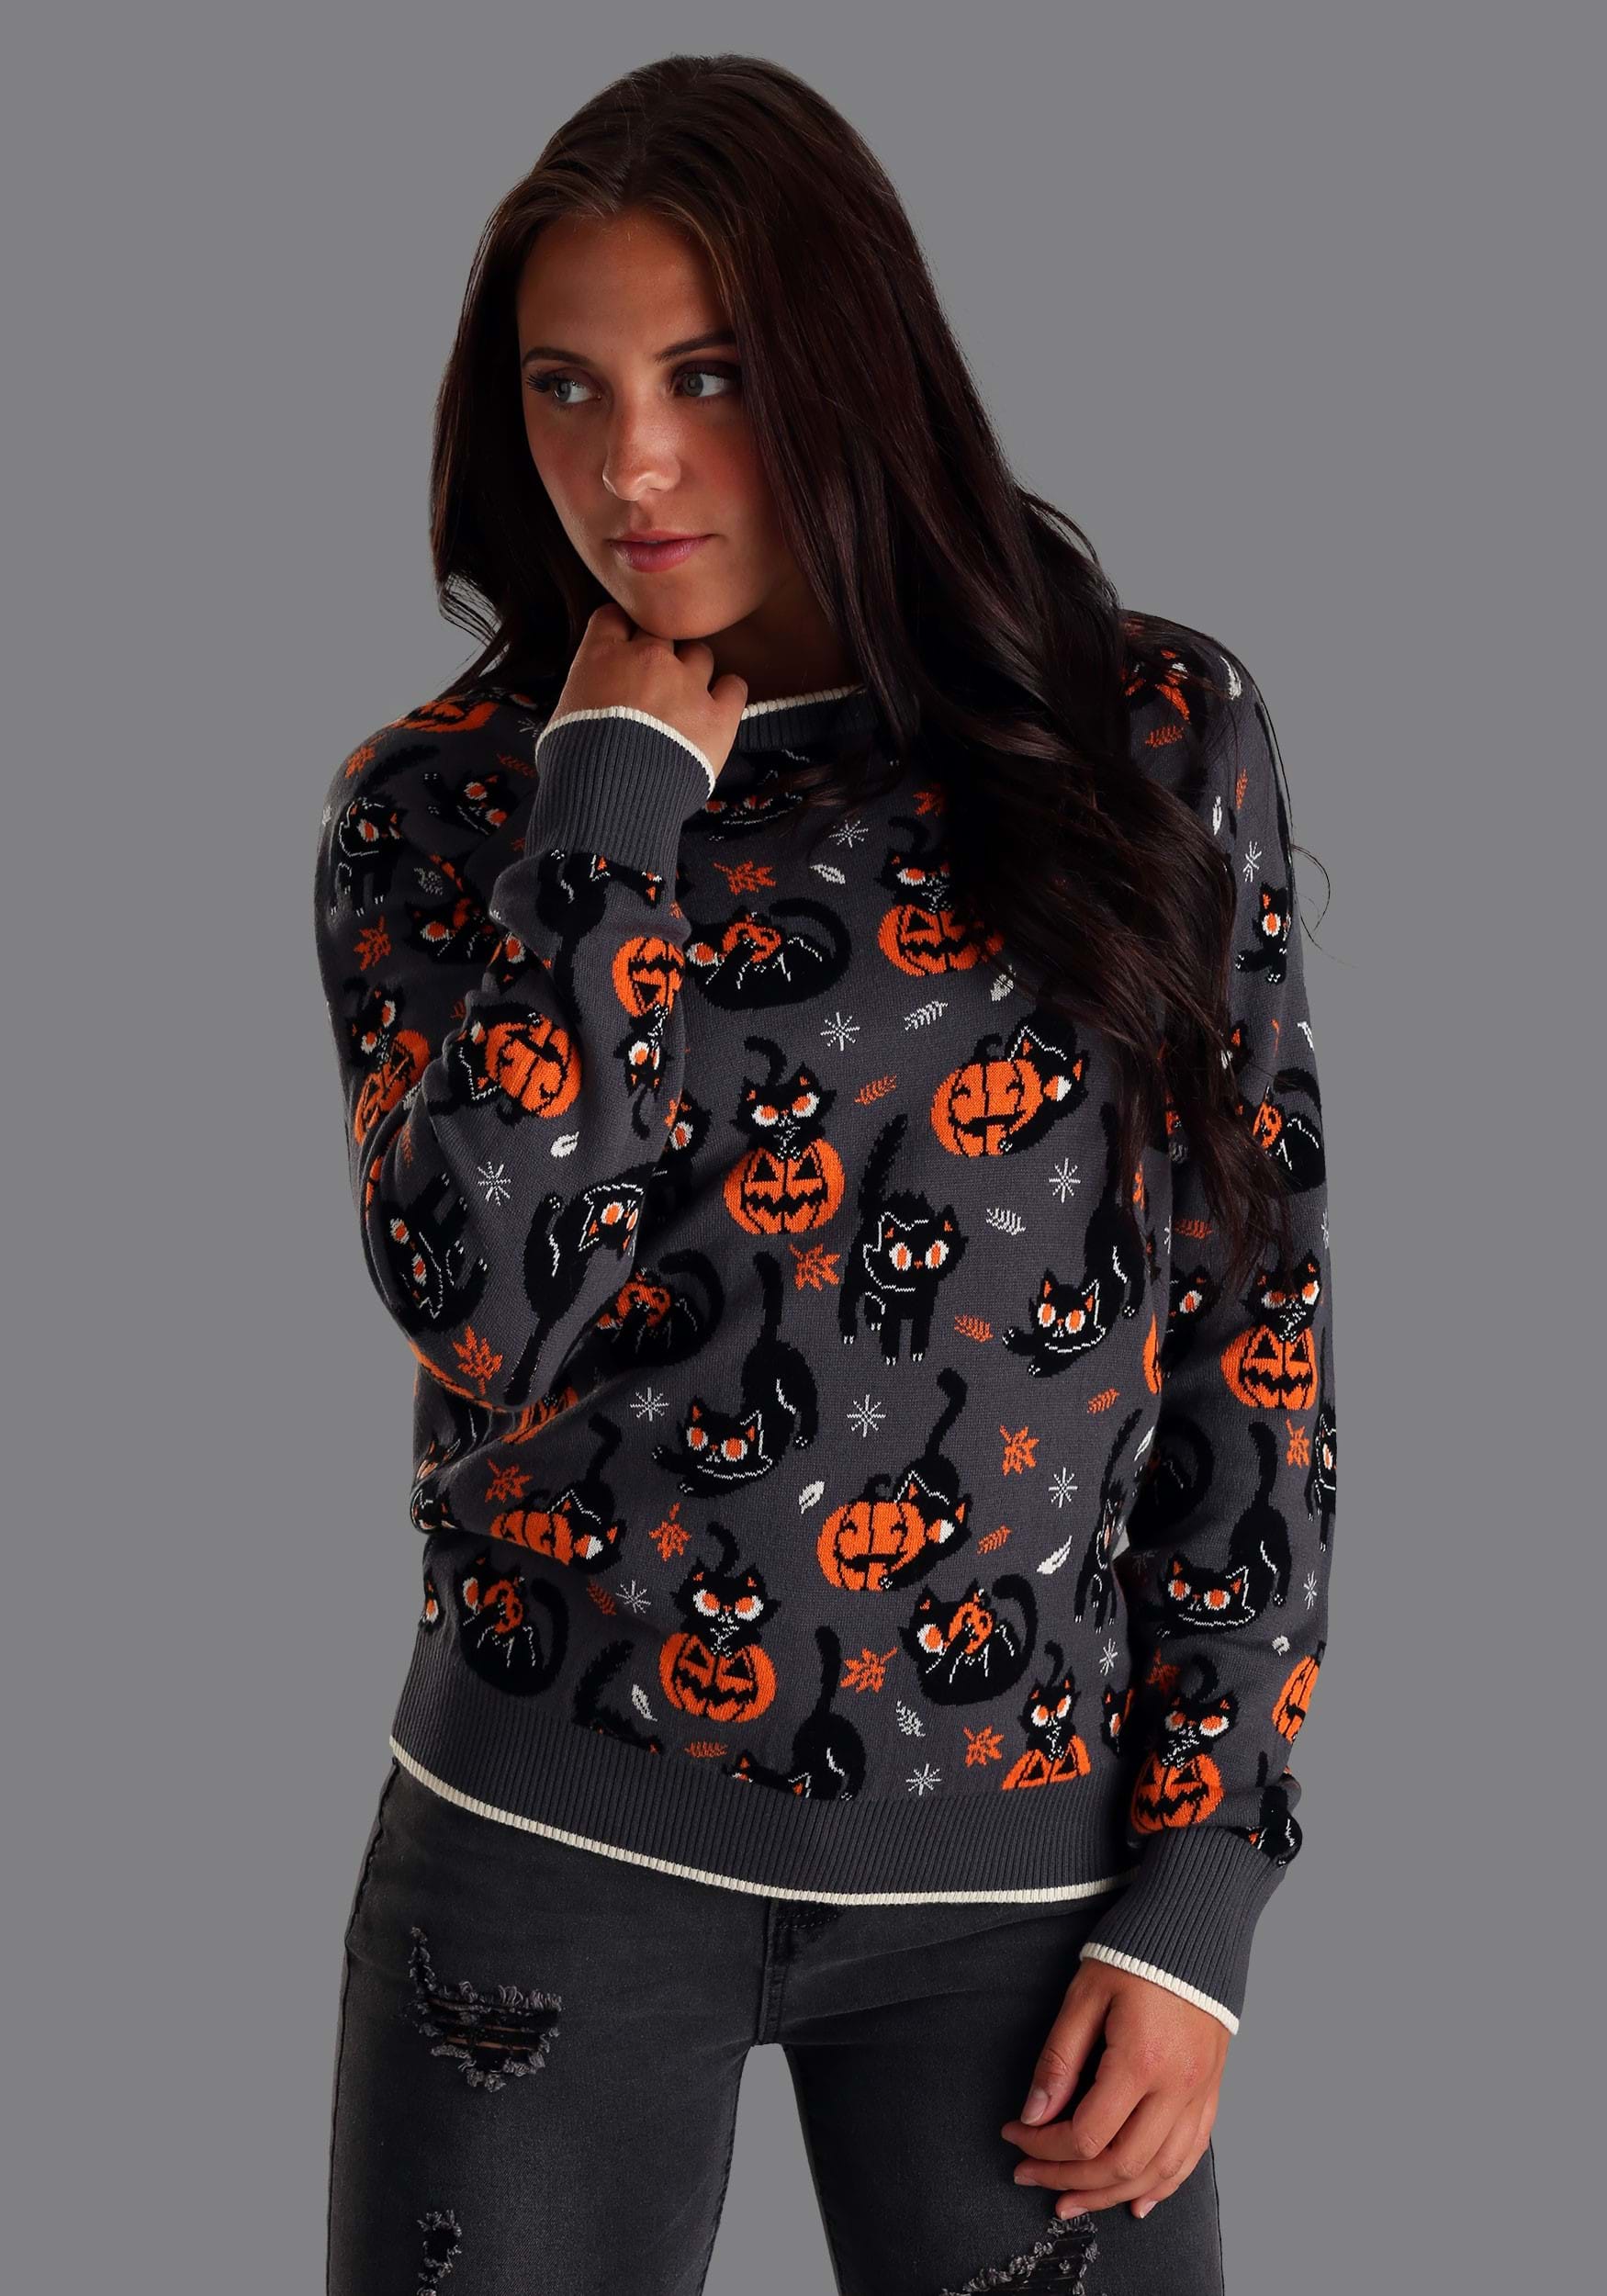 Quirky Kitty Adult Halloween Sweater